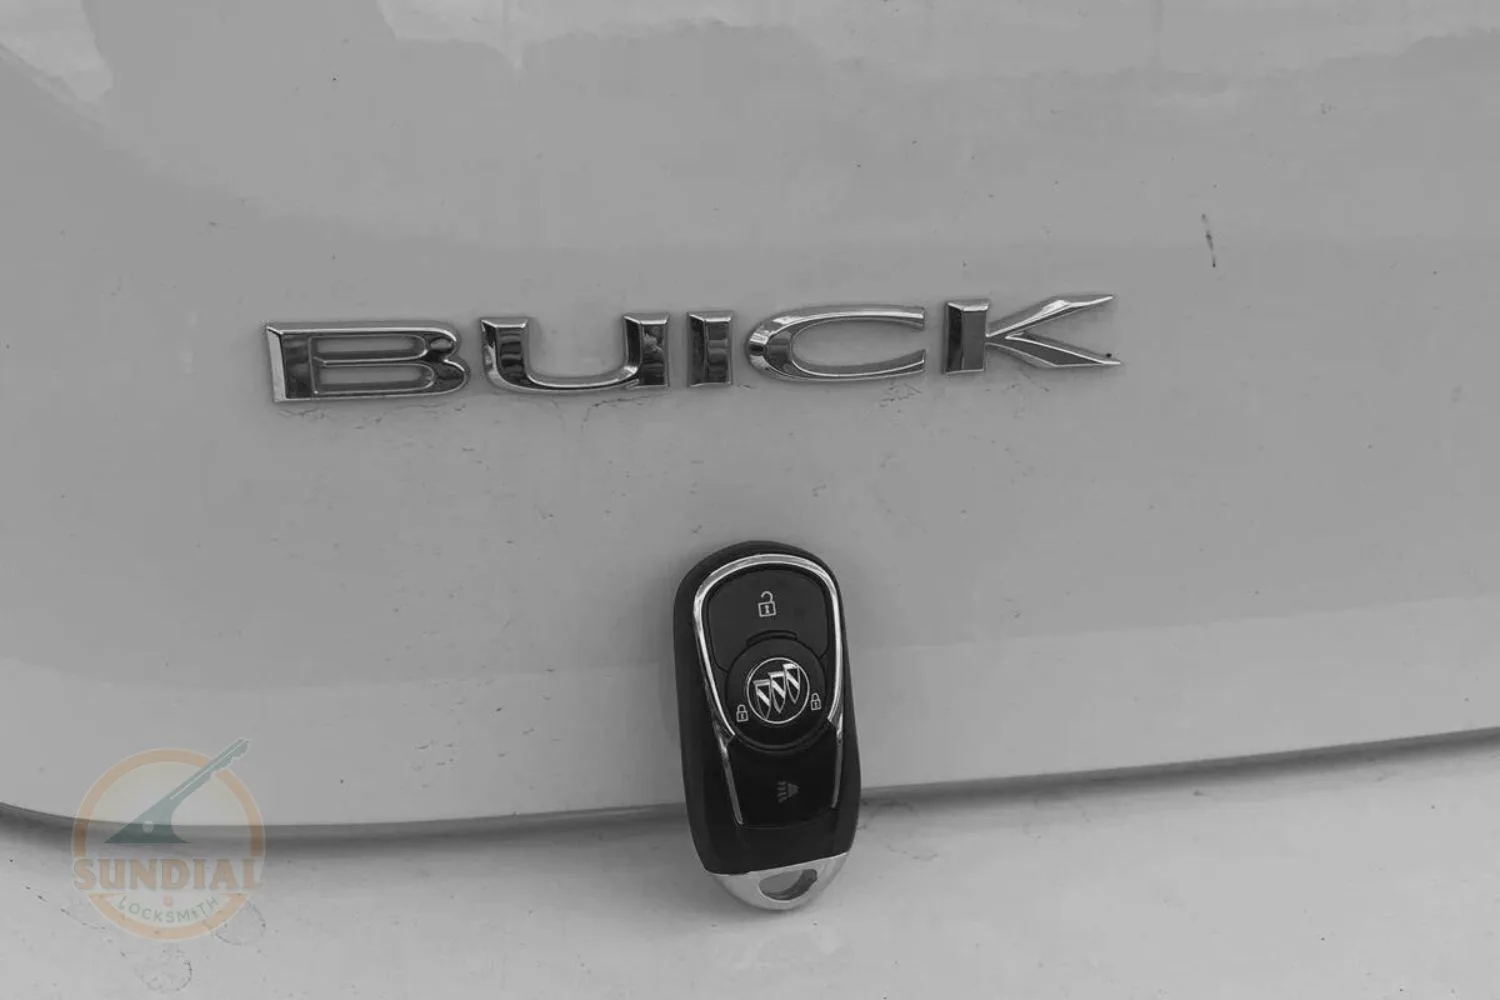 A black and white image of a Buick key fob in front of the Buick emblem on a car's trunk